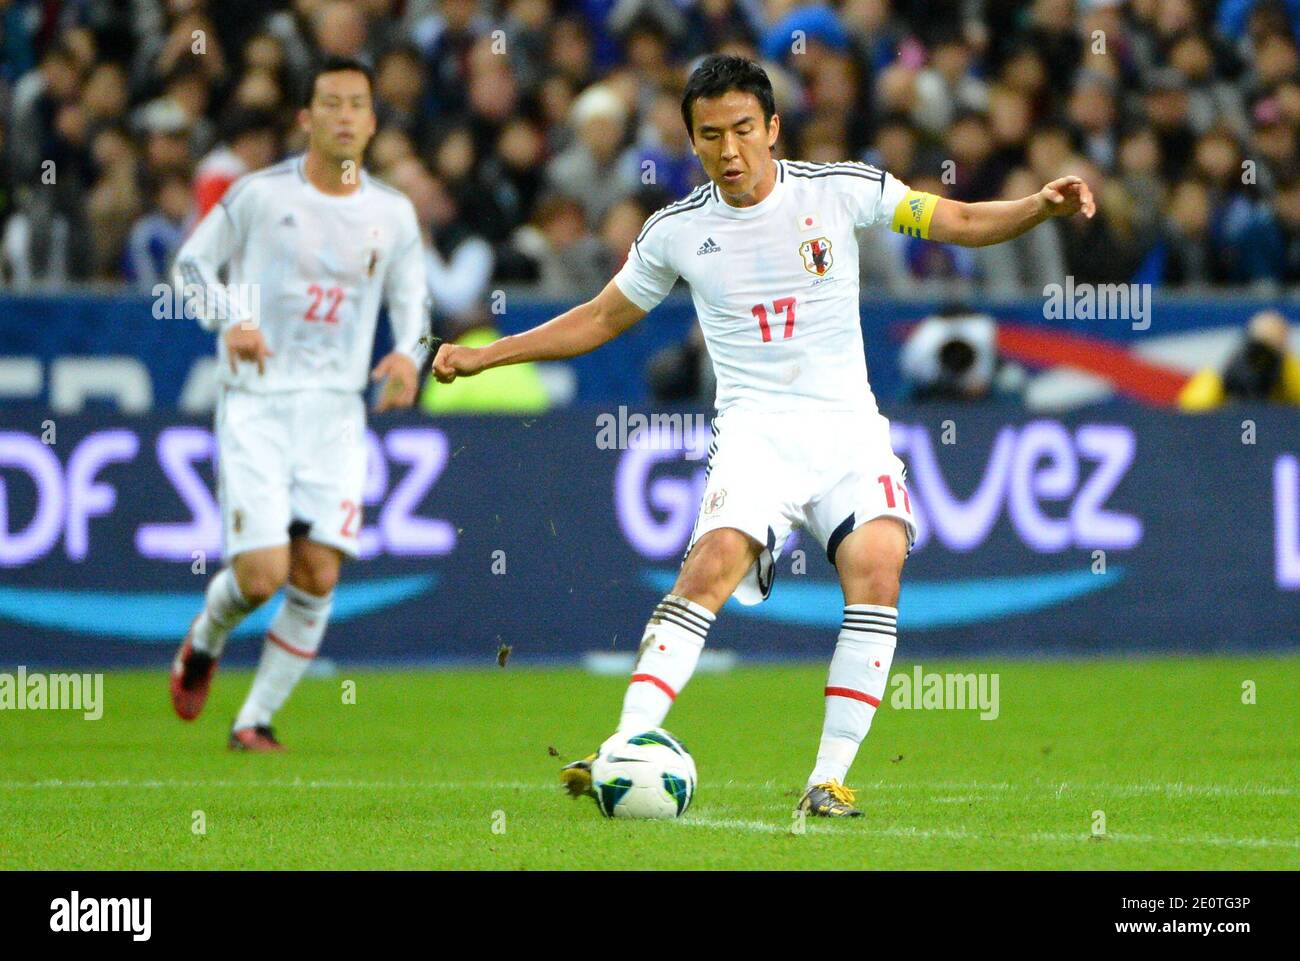 Japan's Makoto Hasebe during the Friendly International Soccer match, France Vs Japan at Stade de France in Saint-Denis suburb of Paris, France on October 12, 2012. Japan won 1-0. Photo by Christian Liewig/ABACAPRESS.COM Stock Photo